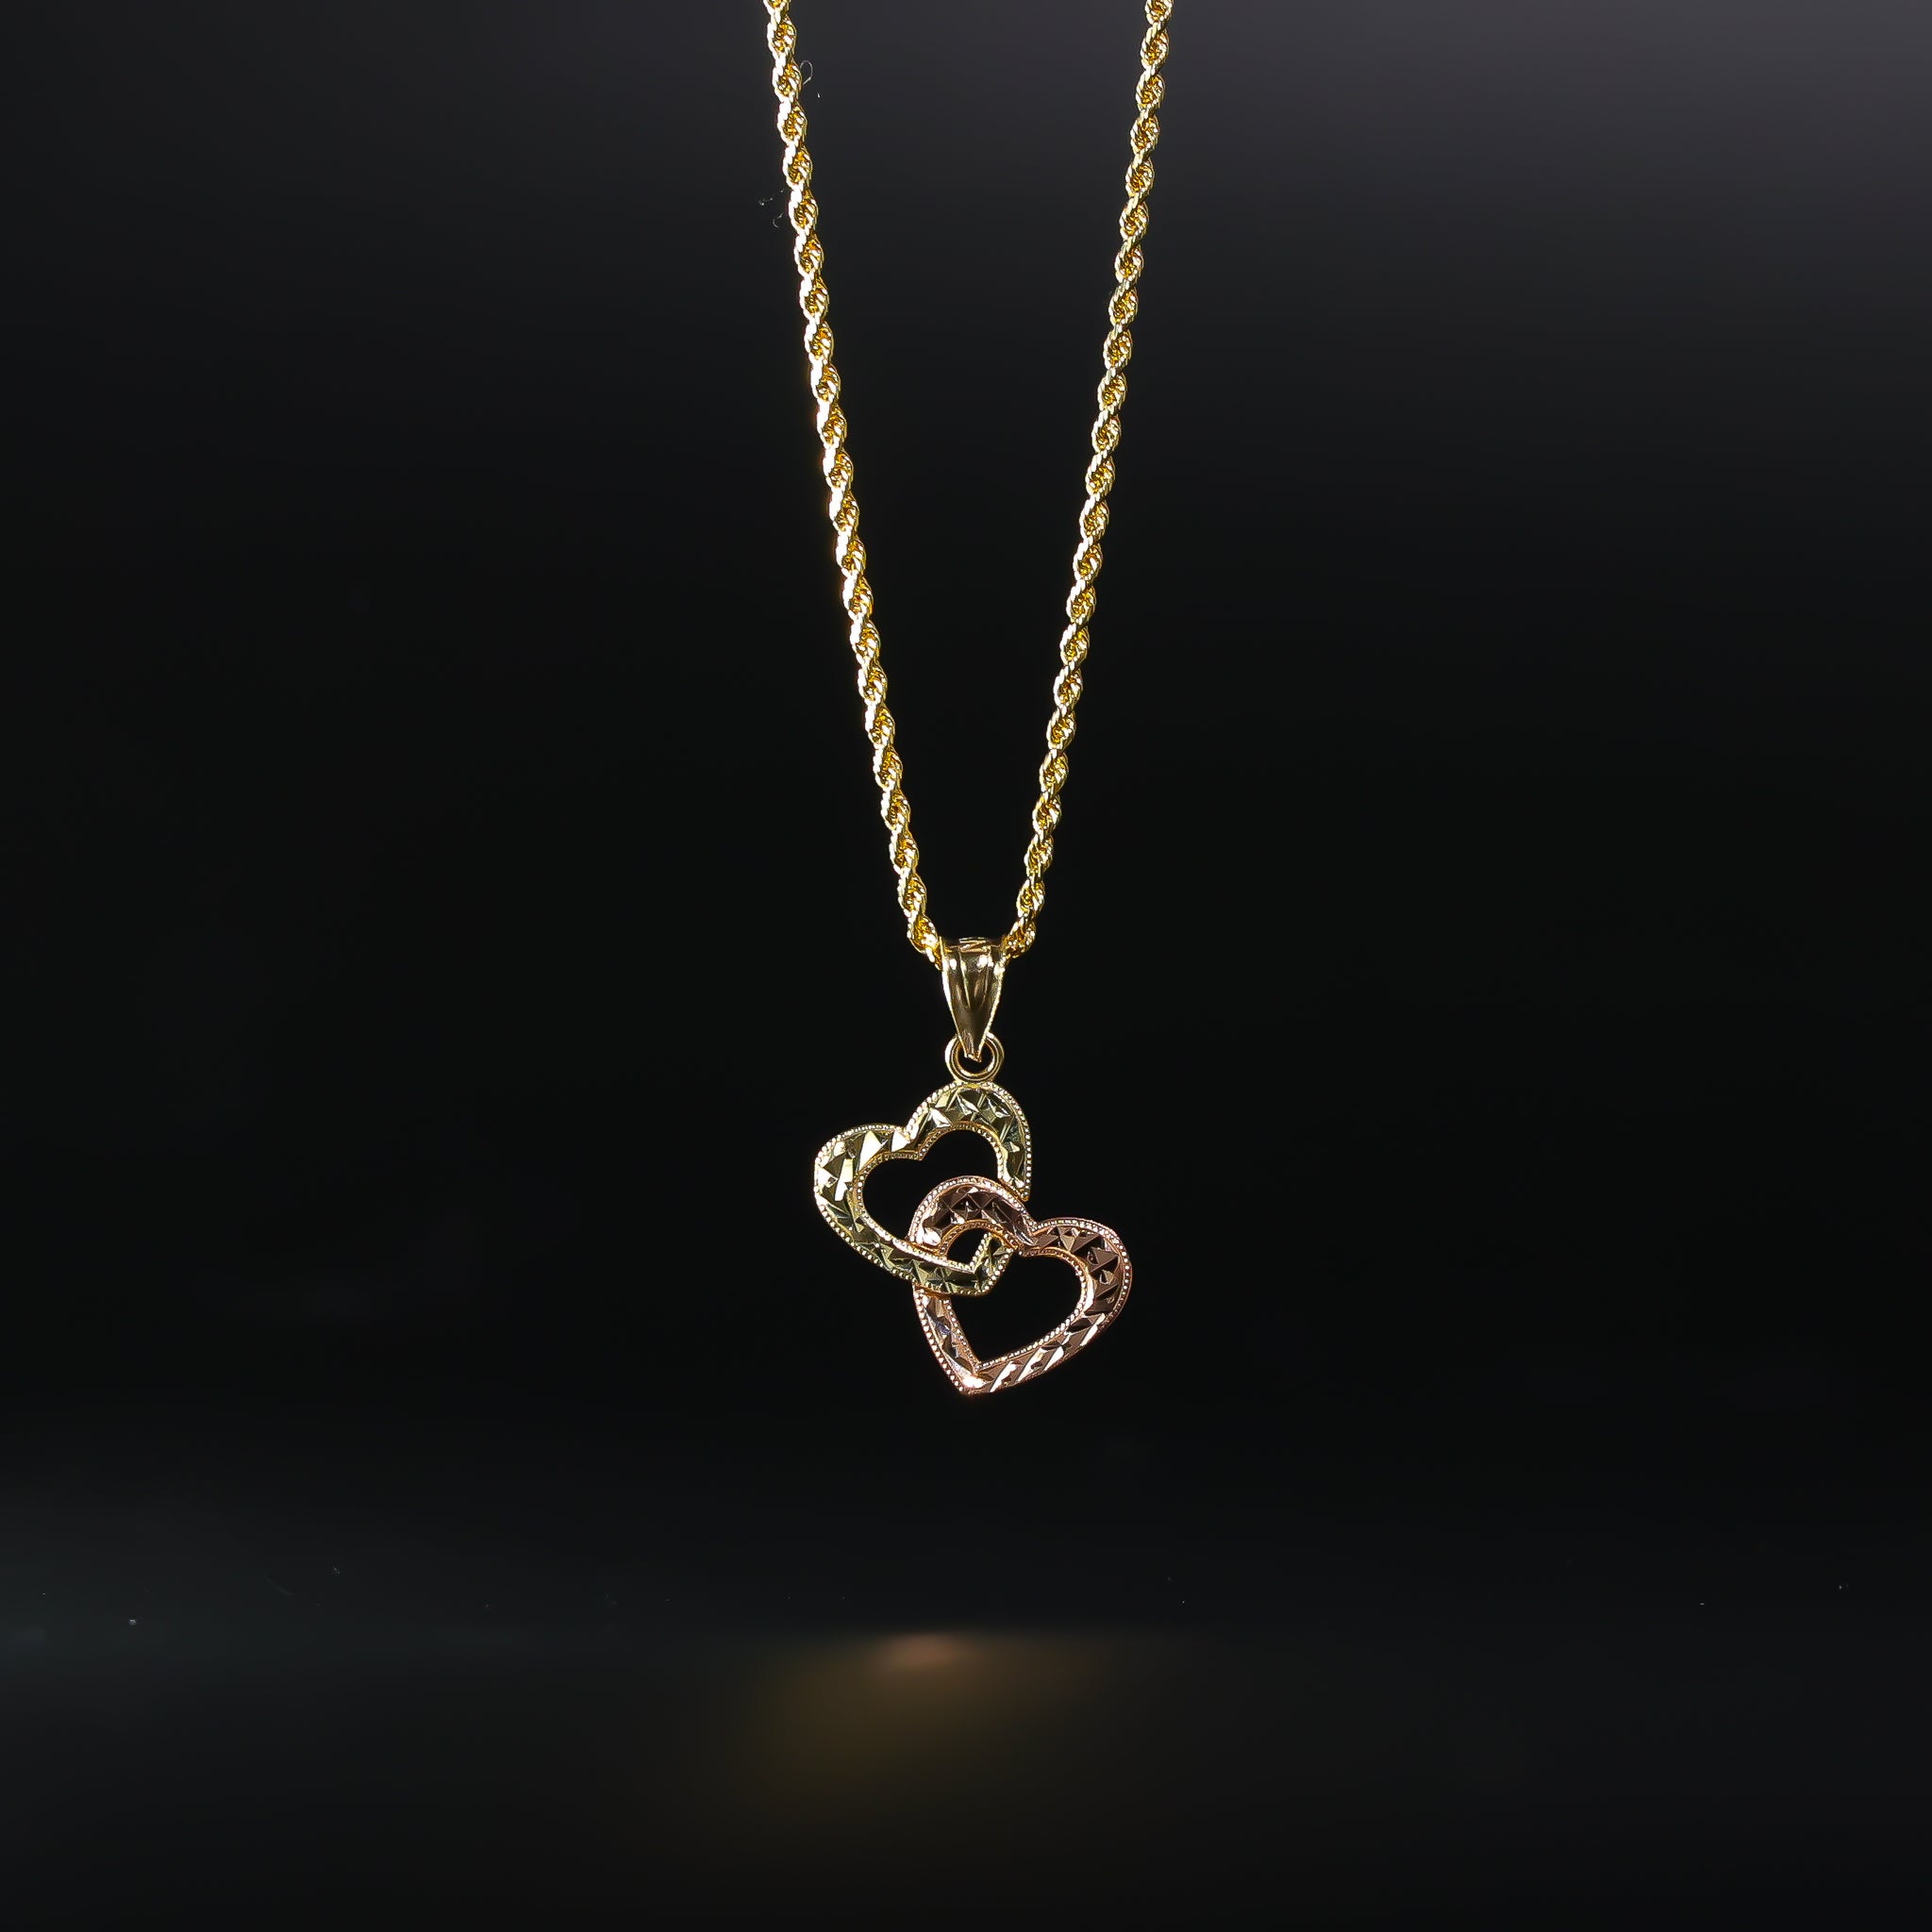 Gold Double Heart Pendant Model-437 - Charlie & Co. Jewelry